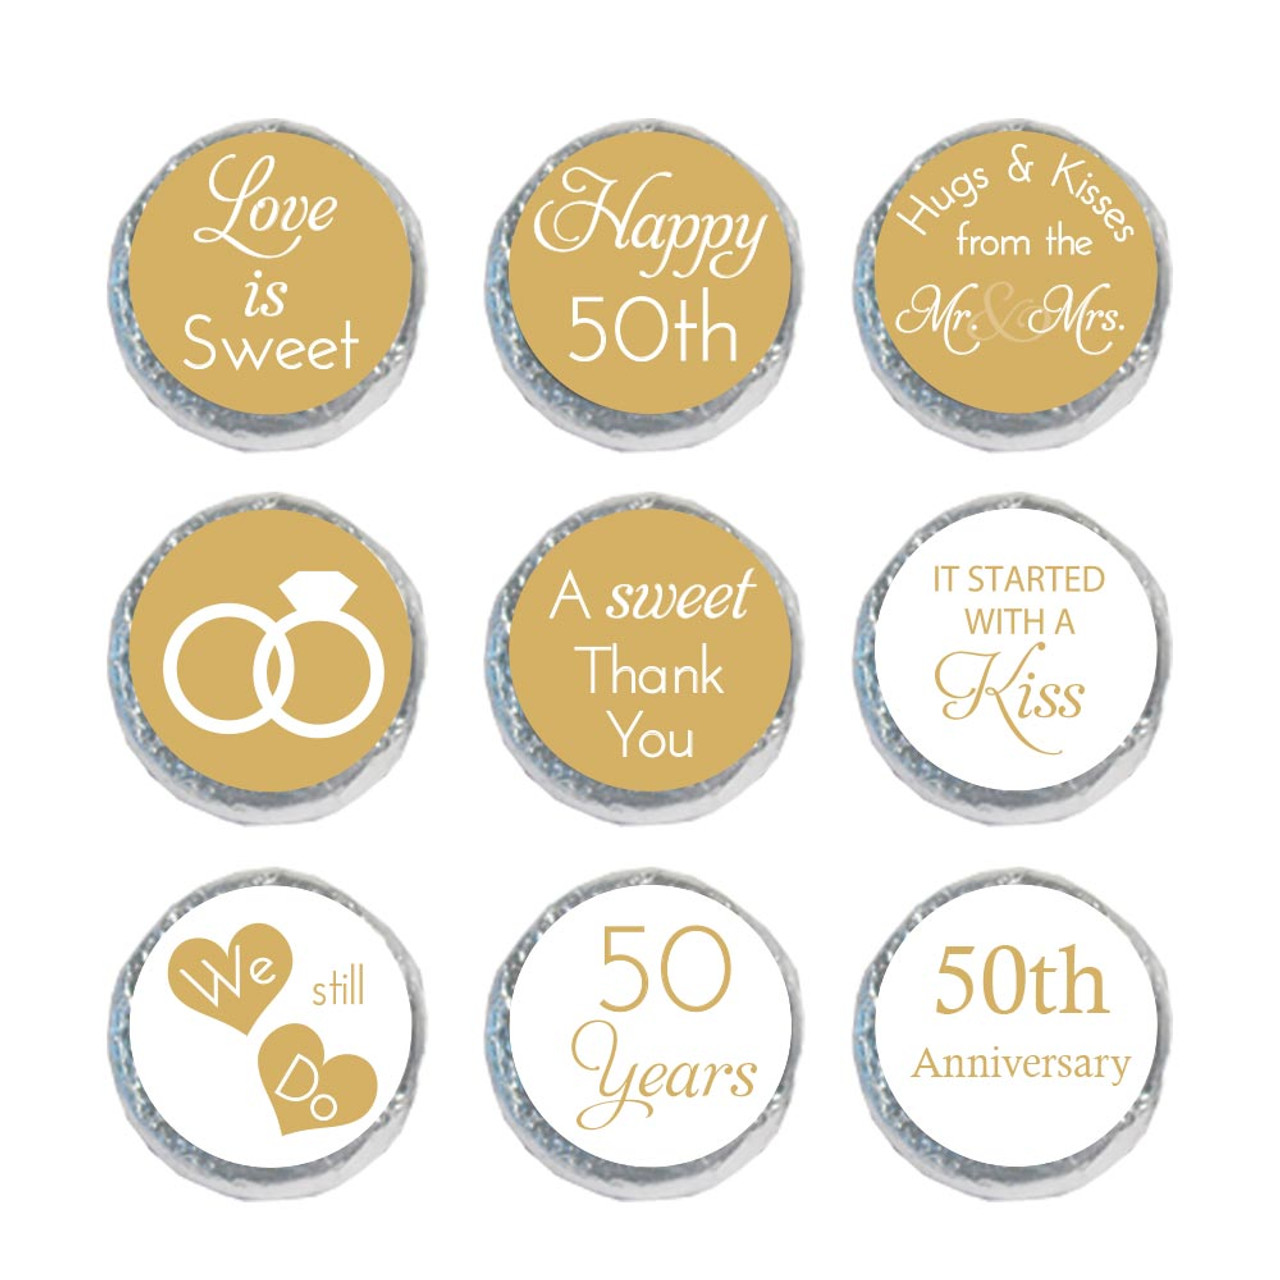 Wedding Stickers (for envelopes or favors)